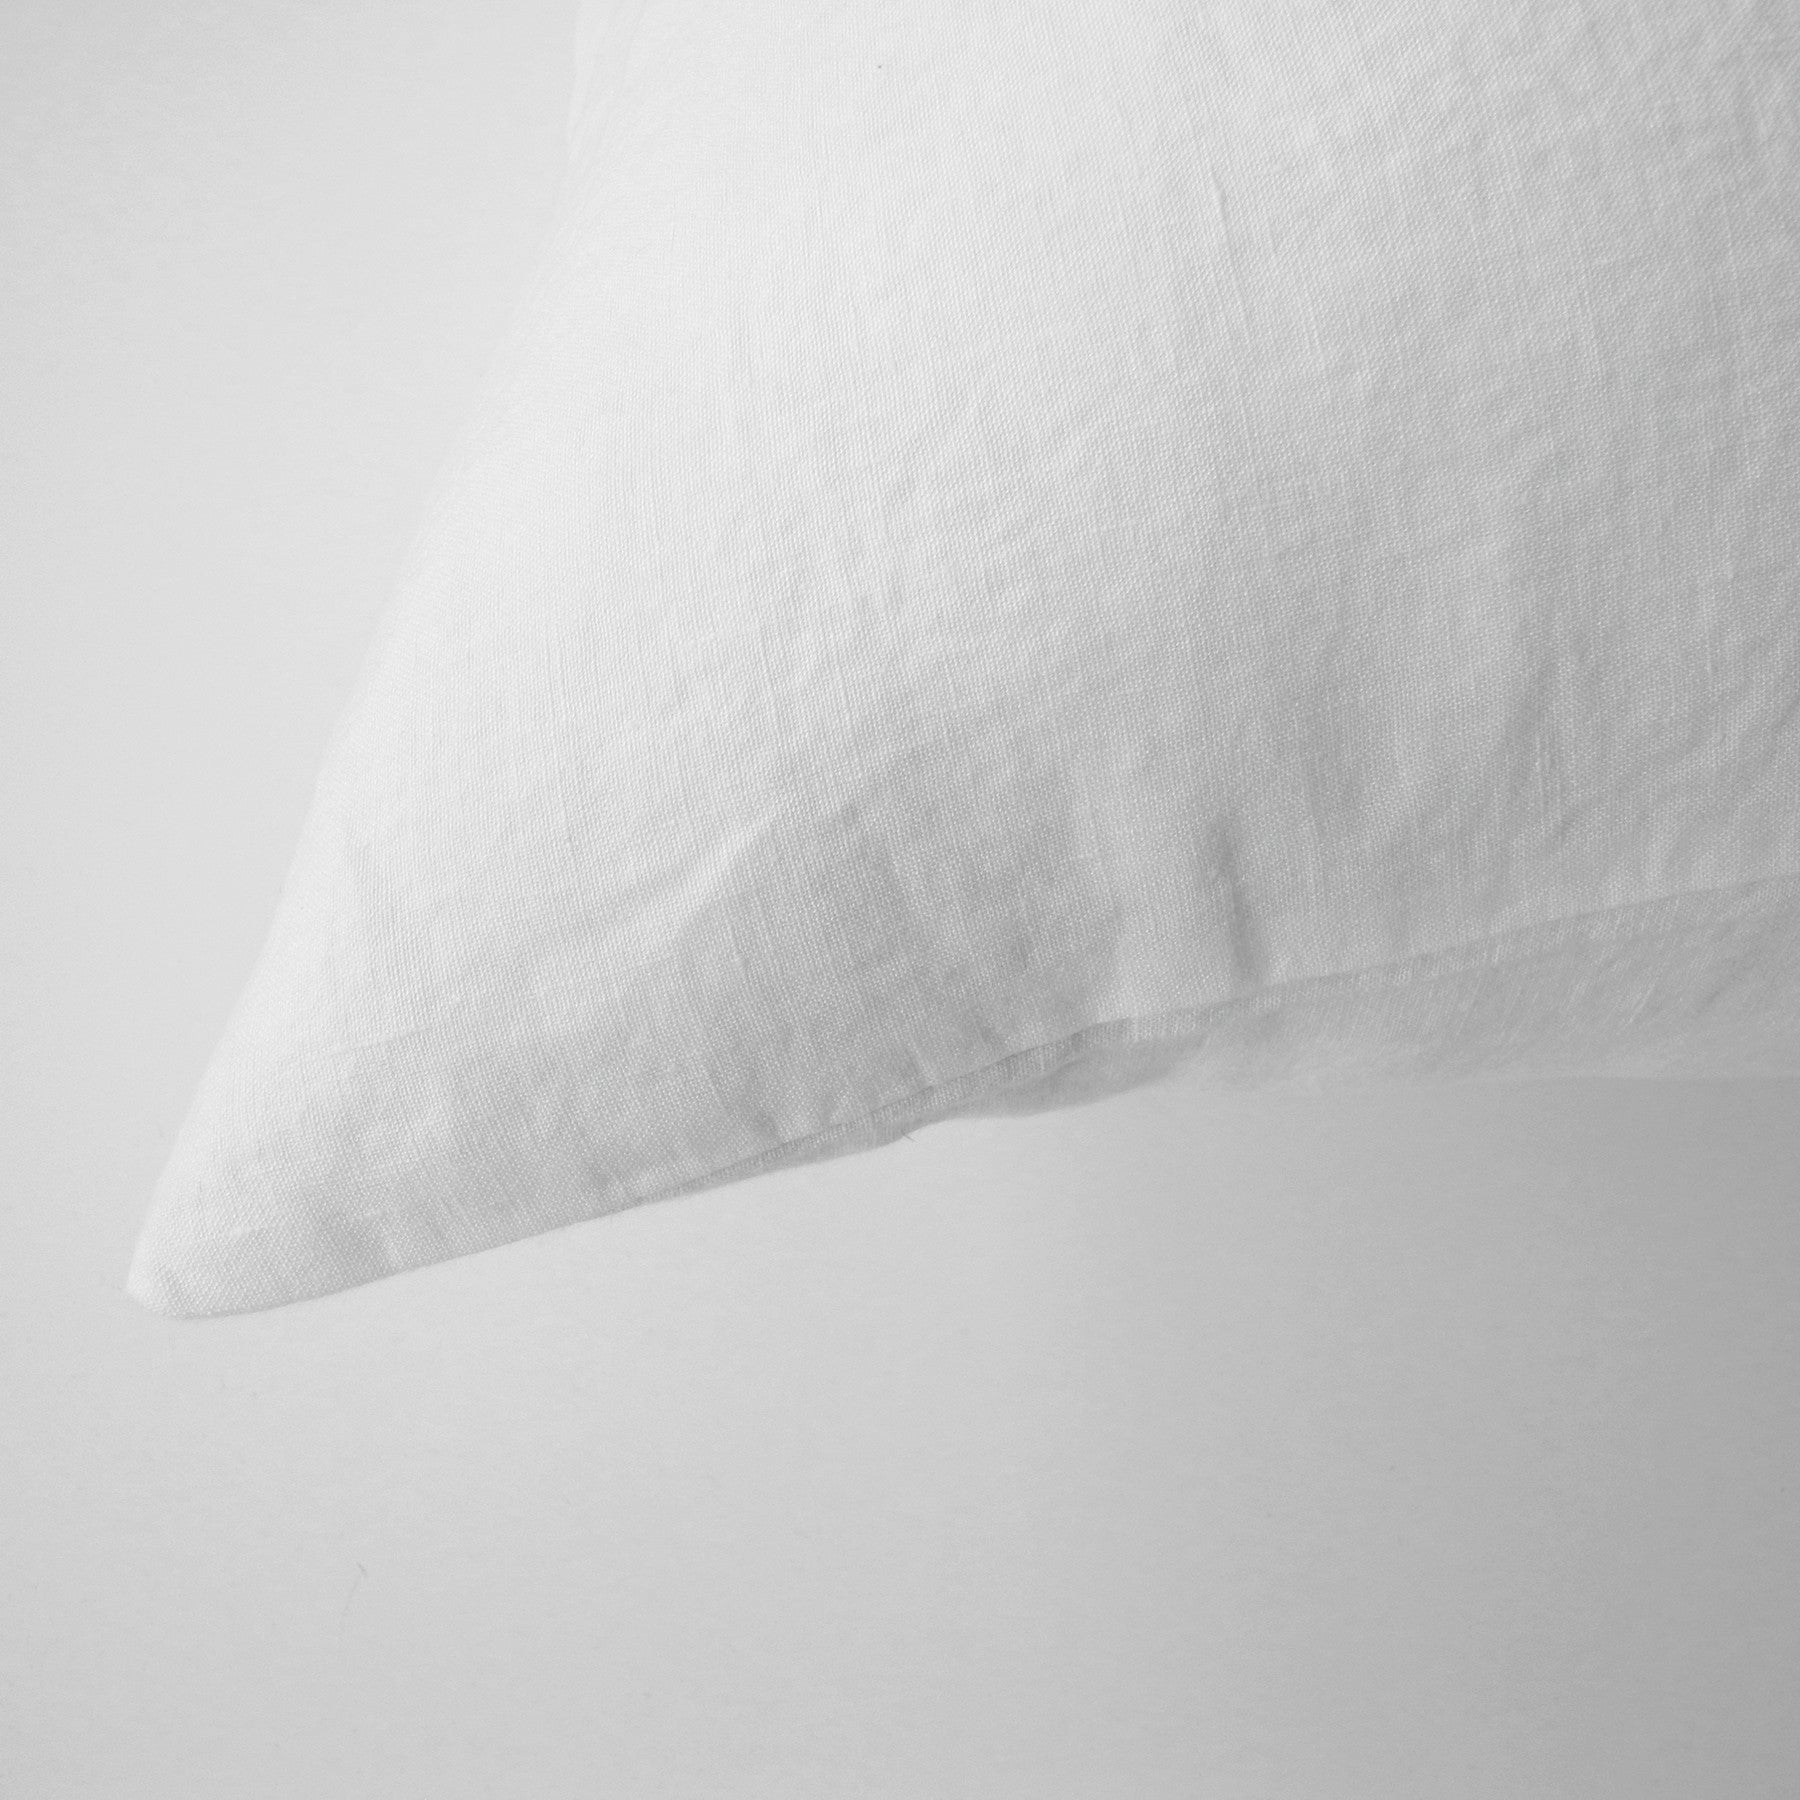 Linge Particulier Off White Euro Linen Pillowcase Sham for a colorful linen bedding look in soft white - Collyer's Mansion